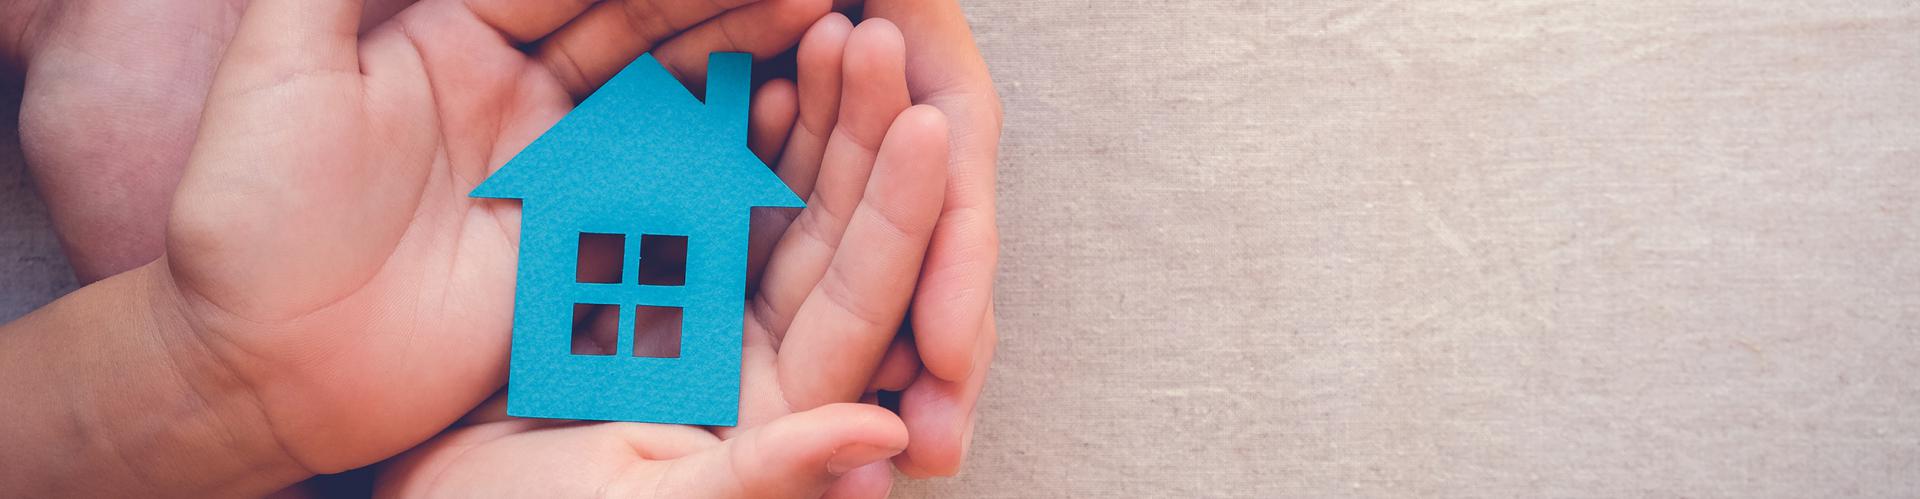 Child and adult holding blue paper image of a home